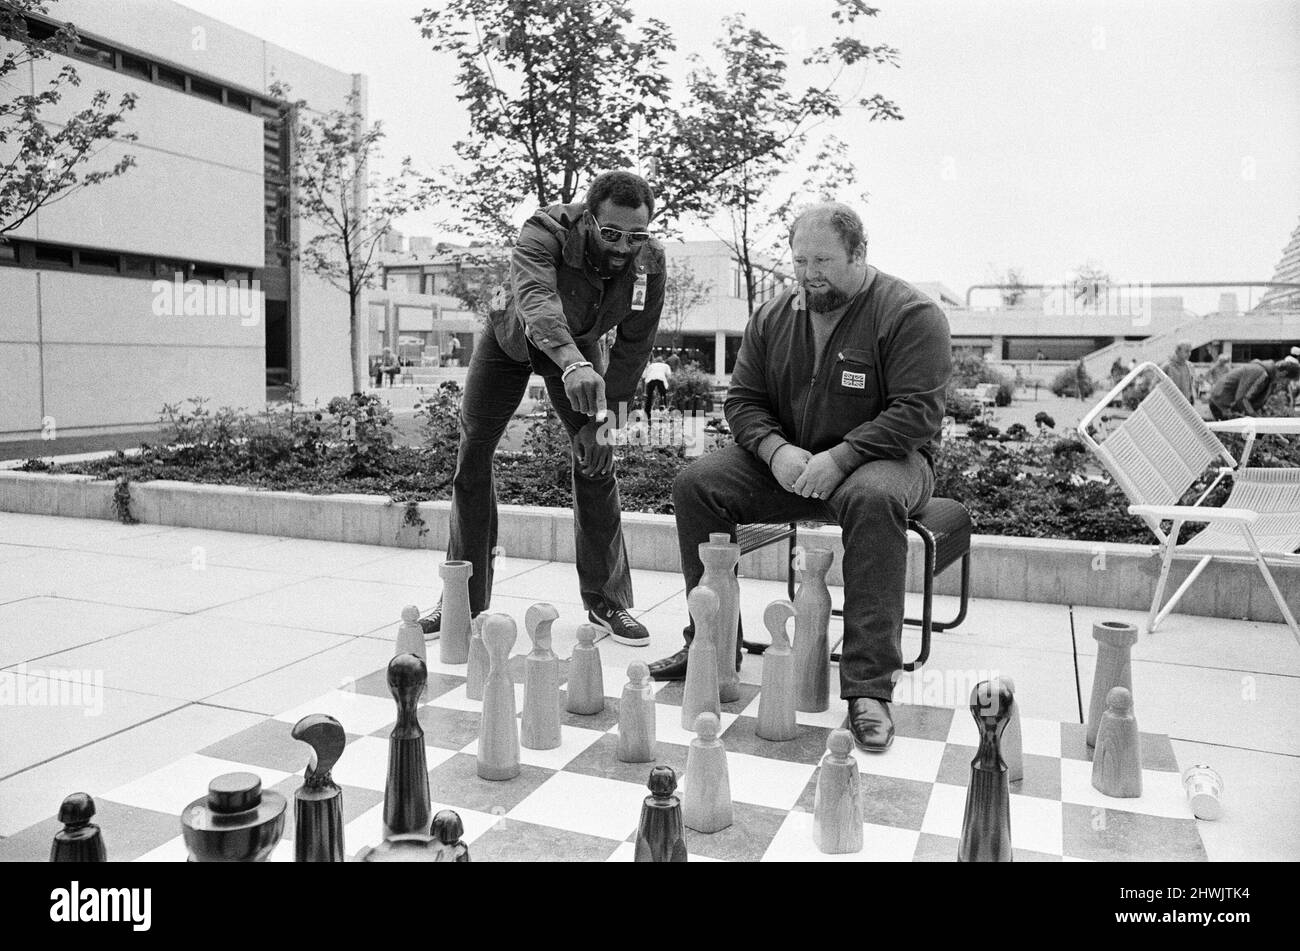 Olympic Games 1972 Munich Germany, Wednesday 23rd August 1972. Our picture shows ... John Carlos American sprinter watching a game of giant chess with welsh super heavy weightlifter Terry Perdue.  John Carlos caused controversy at the 1968 Mexico Games by giving a black power salute from the podium after receiving his bronze medal for the 200 metres. Stock Photo